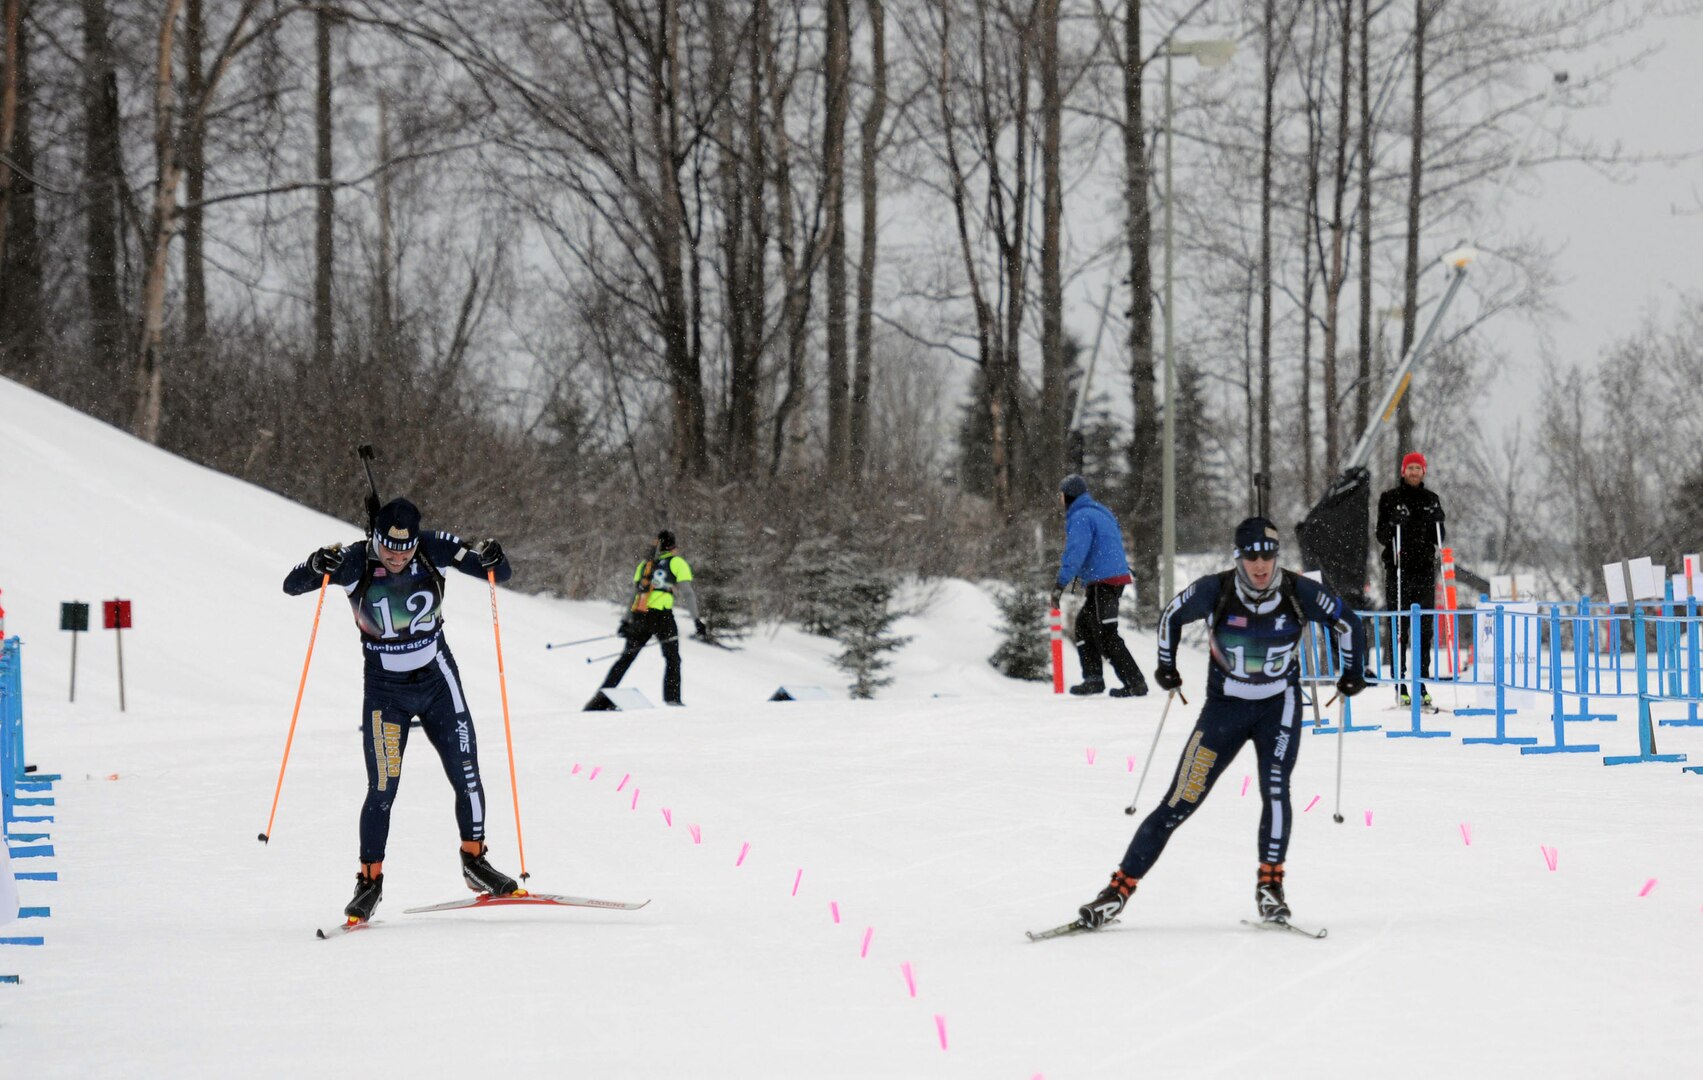 Spc. Jake Todd, left, Alaska Army National Guard and Staff Sgt. Jamie Haines, right, Alaska Air National Guard, sprint to the finish line during the pursuit competition of the National Guard Bureau's Western Regional Biathlon at Kincaid Park in Anchorage, Alaska, Jan. 12, 2014.